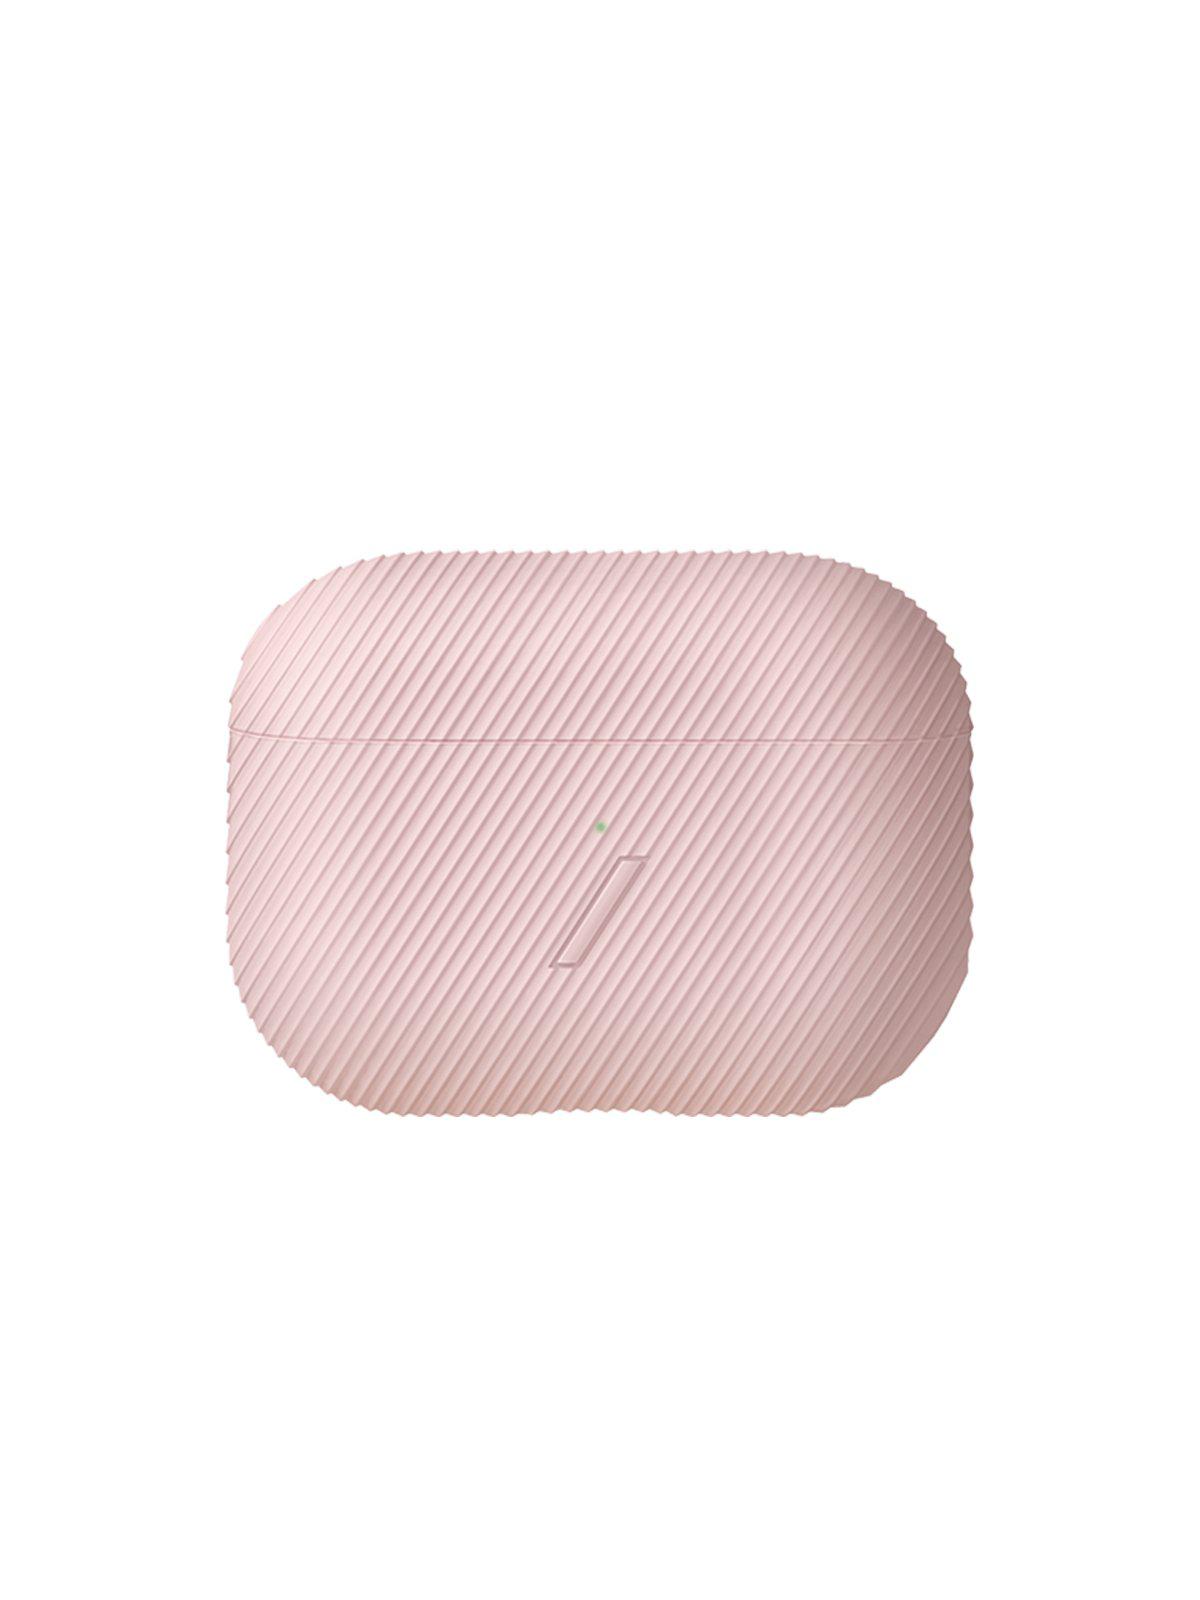 Native Union Curve Case for AirPods Pro Rose